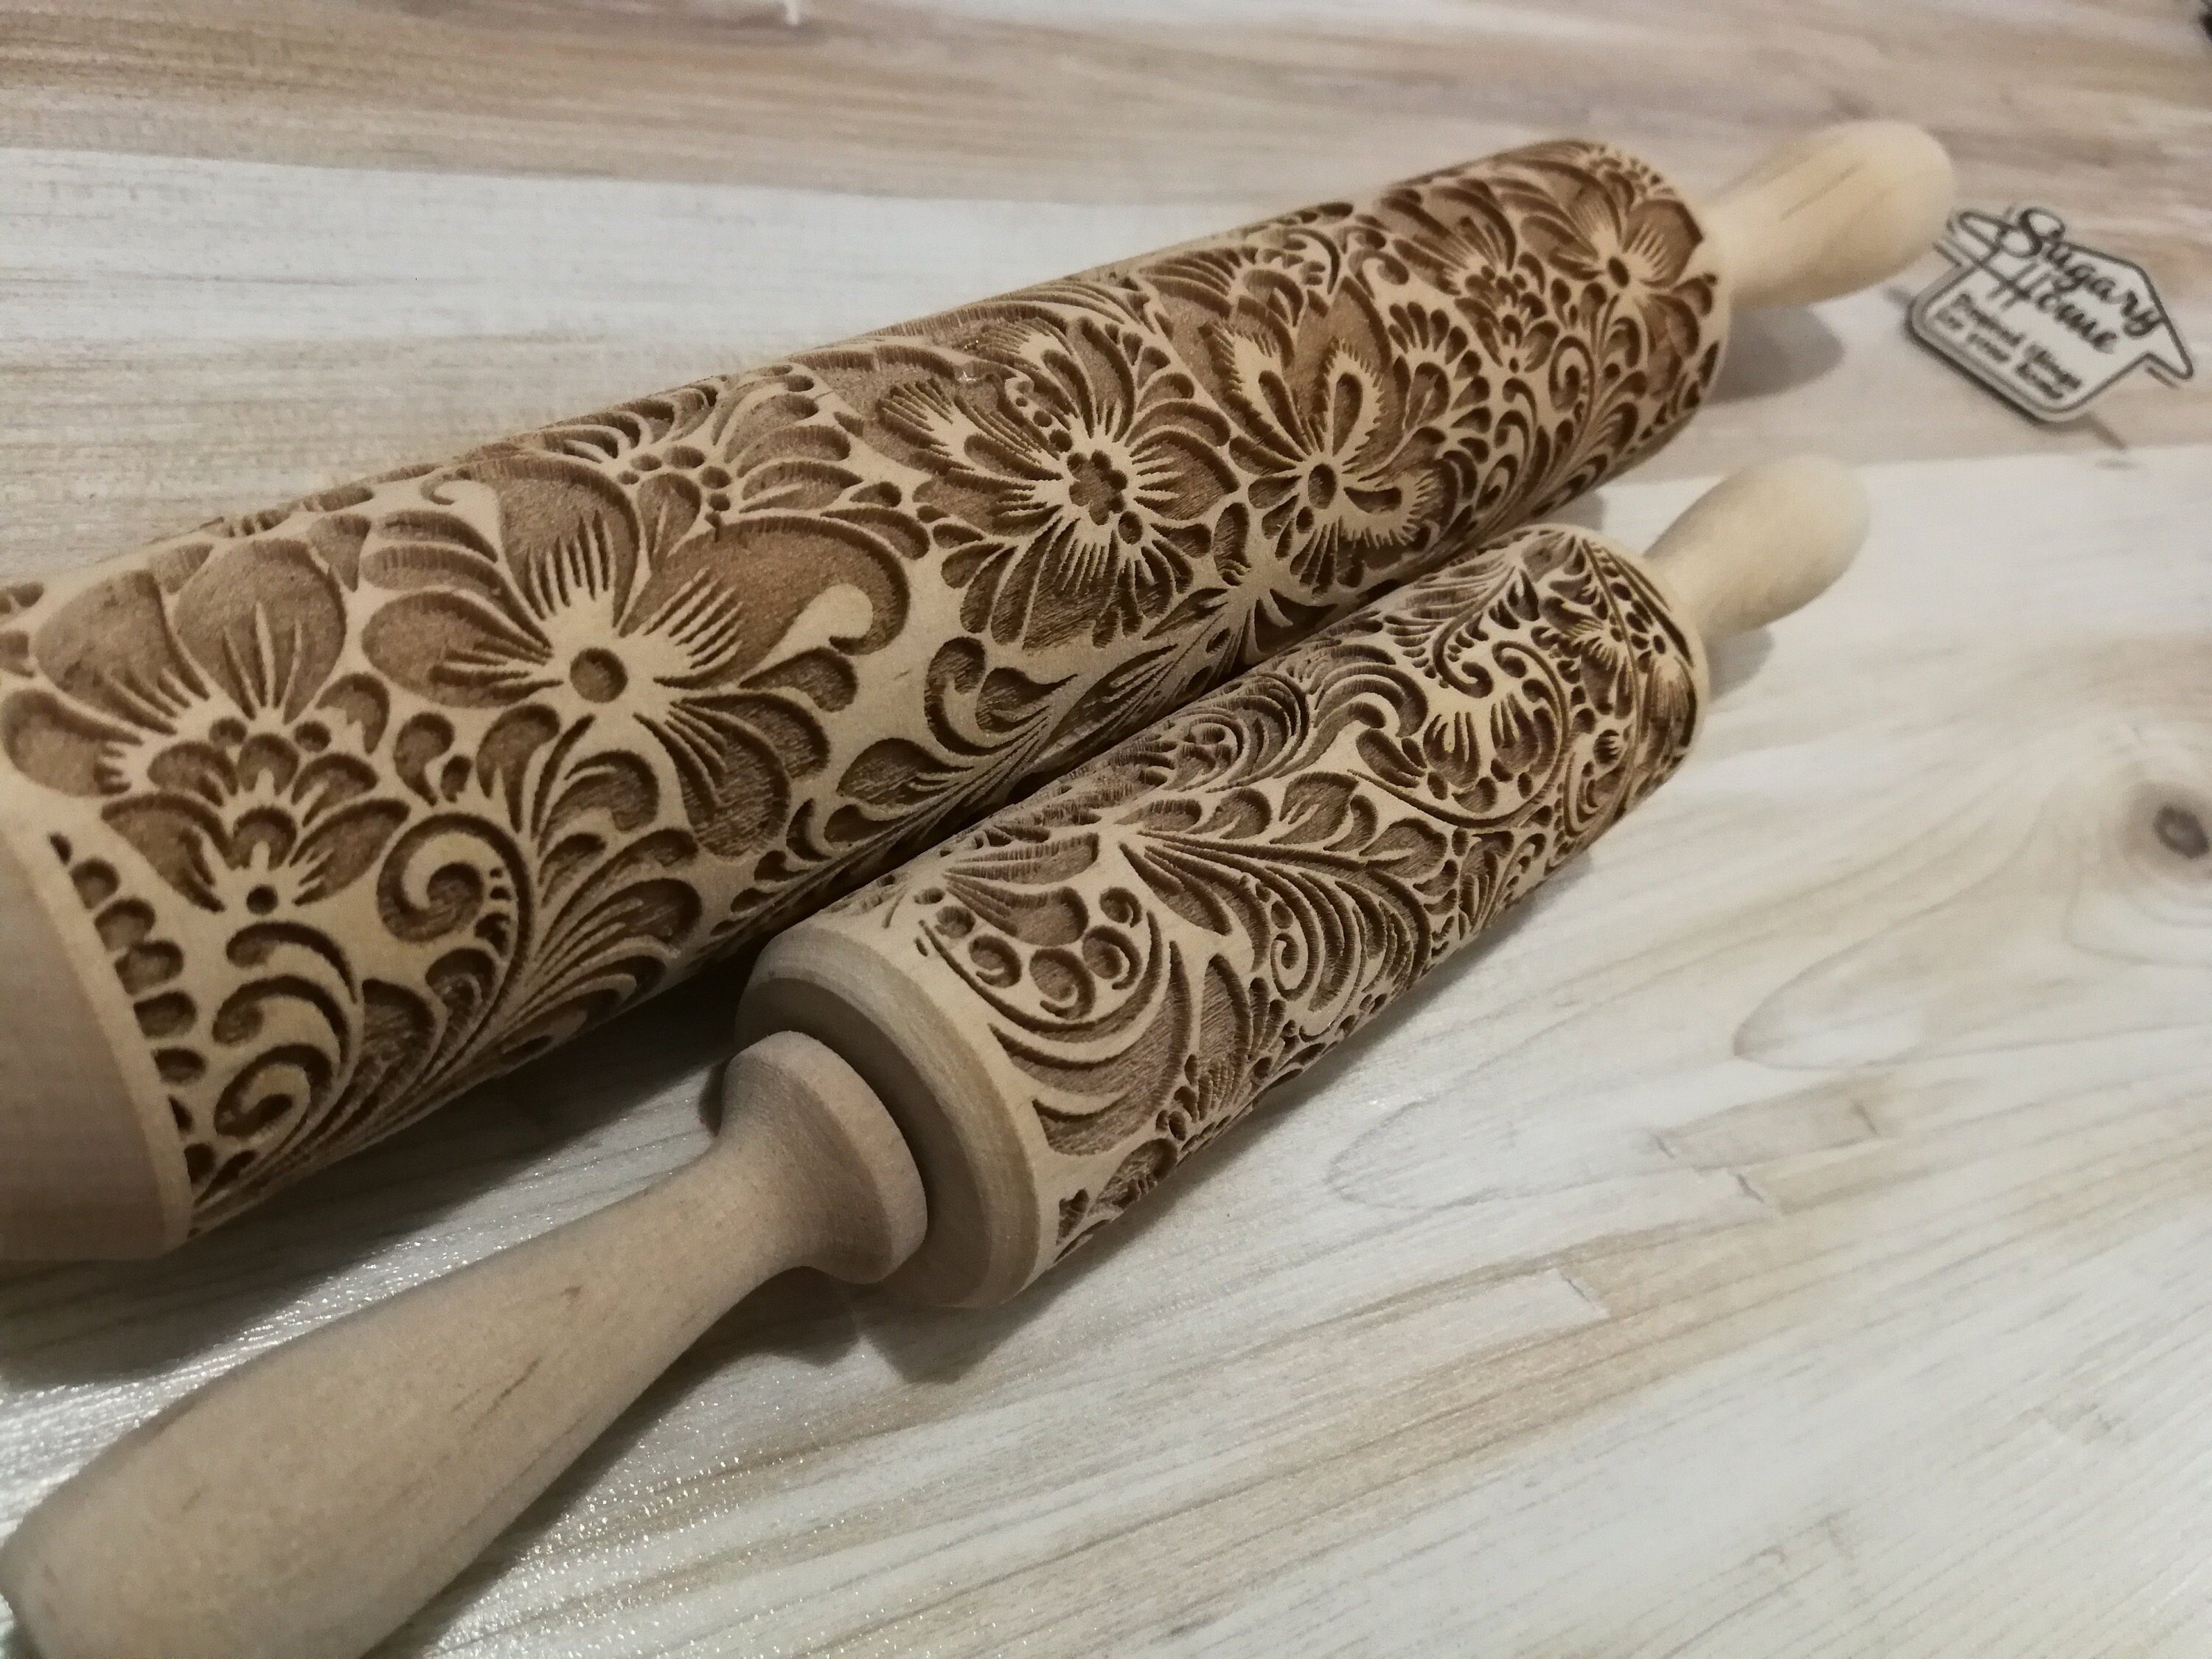 Pottery Clay Sculpture Rolling Pin Wood Material 30cm Length 4cm